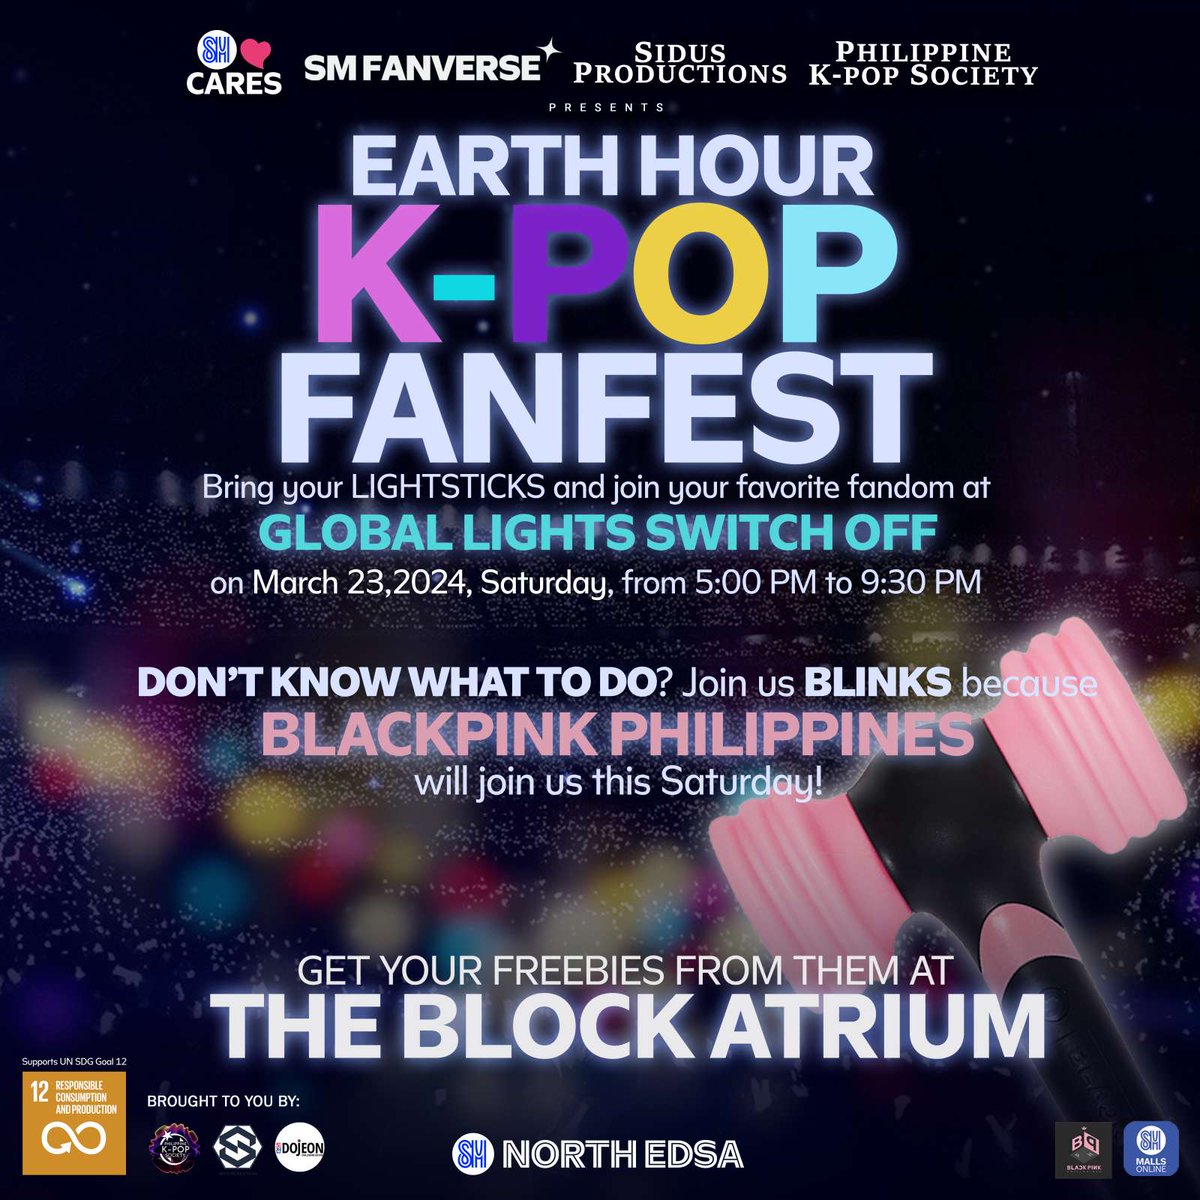 Ready your BLACKPINK LIGHTSICK, as we celebrate 𝗘𝗔𝗥𝗧𝗛 𝗛𝗢𝗨𝗥 𝗞-𝗣𝗢𝗣 𝗙𝗔𝗡𝗙𝗘𝗦𝗧 at SM North Edsa, Skygarden! 🫰🏻🌍✨

#EverythingIsHere
#YoureAlwaysWelcomeHere
#KPOP #EarthHour
#SupportingCommunities 
#ElectronicWasteCollection